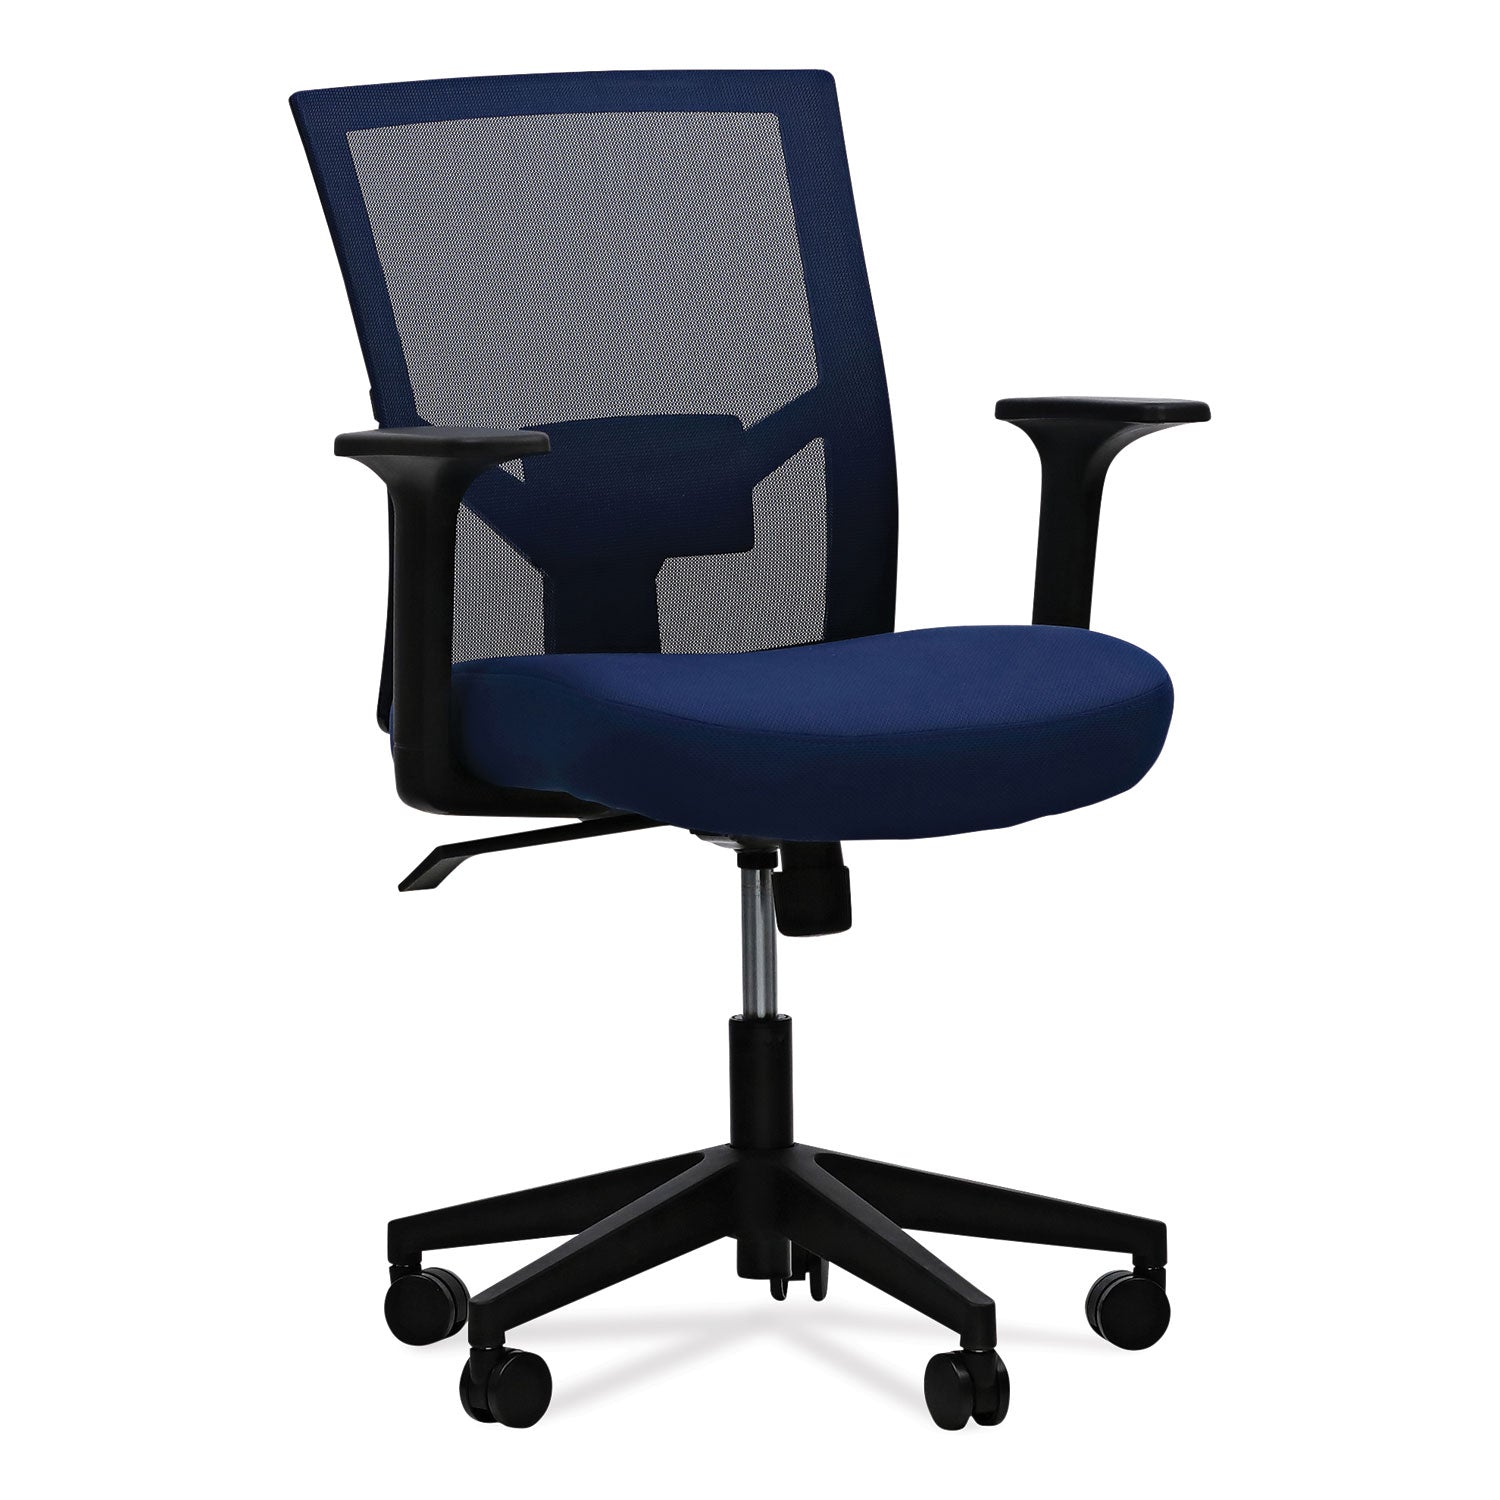 mesh-back-fabric-task-chair-supports-up-to-275-lb-1732-to-211-seat-height-navy-seat-navy-back_alews42b27 - 1